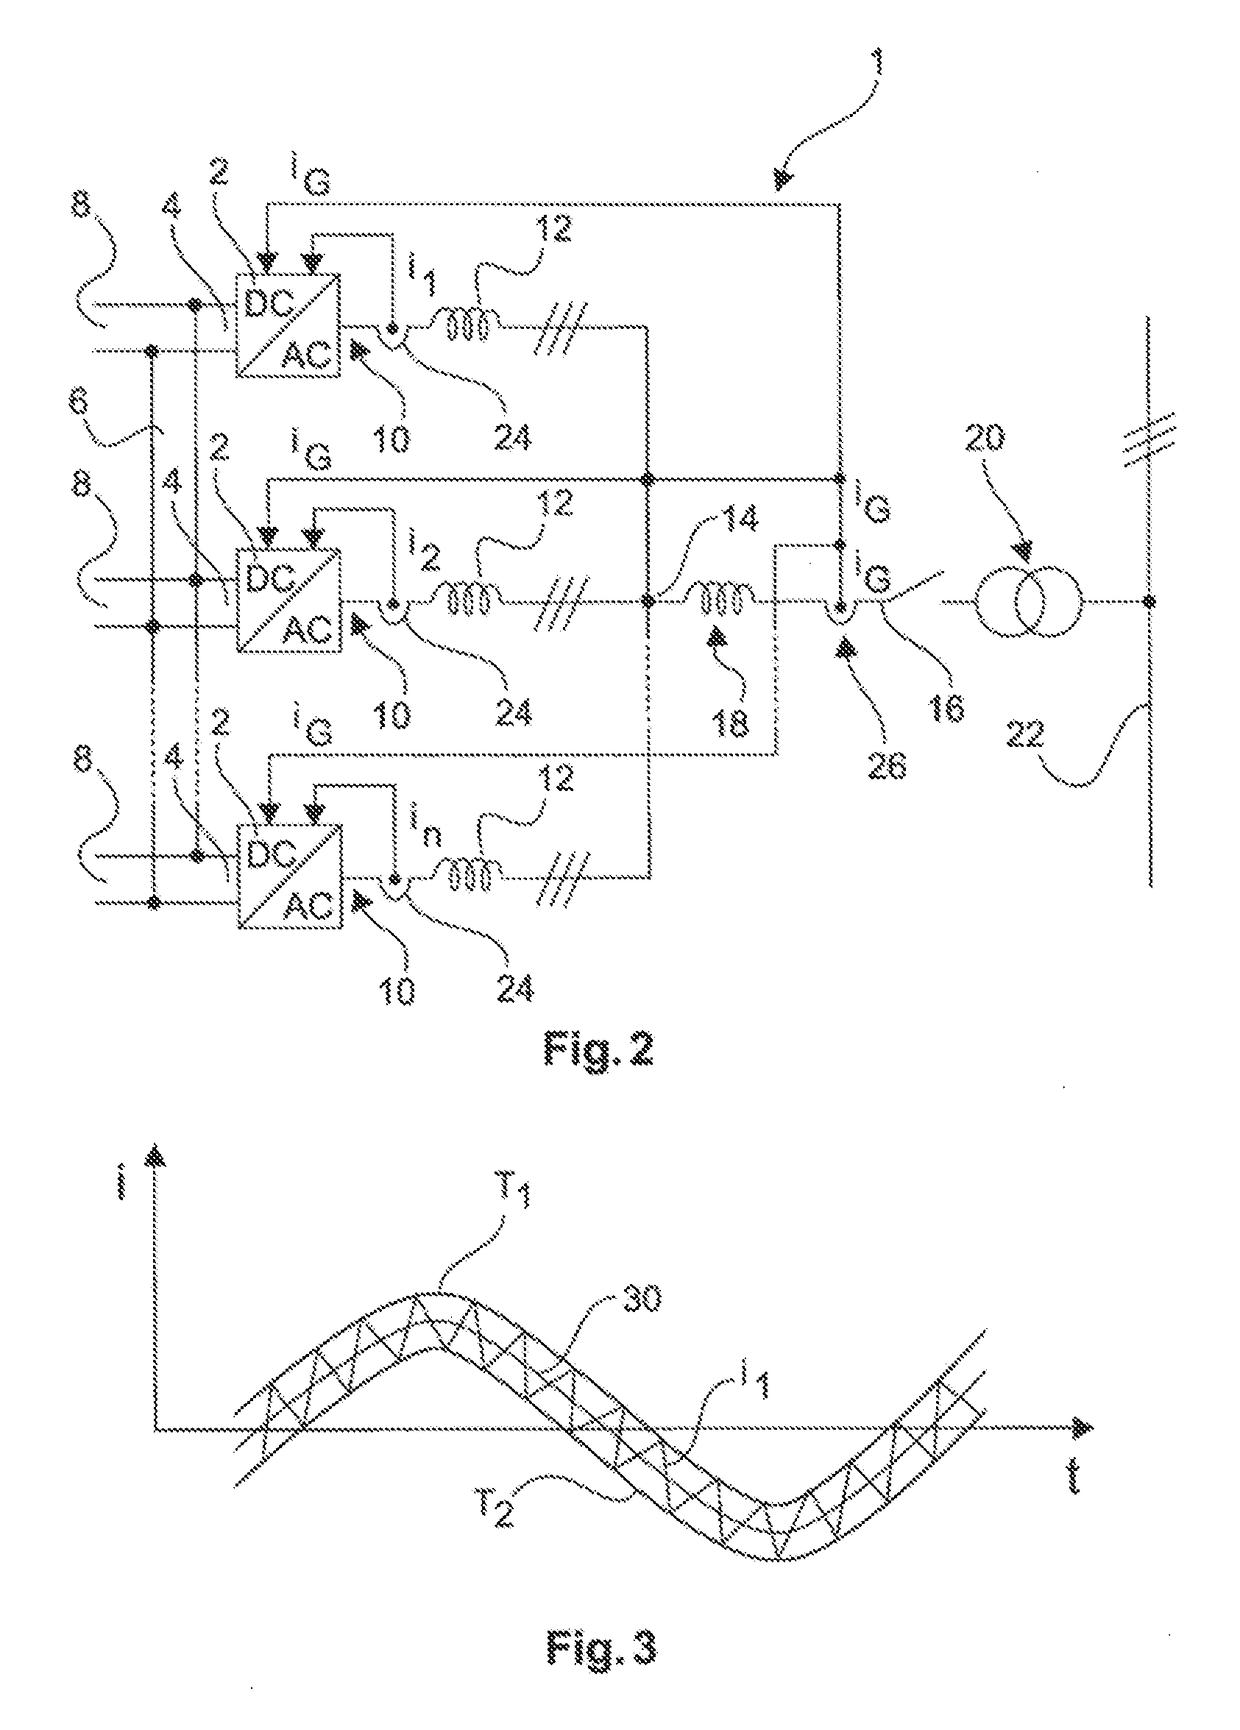 Method for generating an alternating electric current